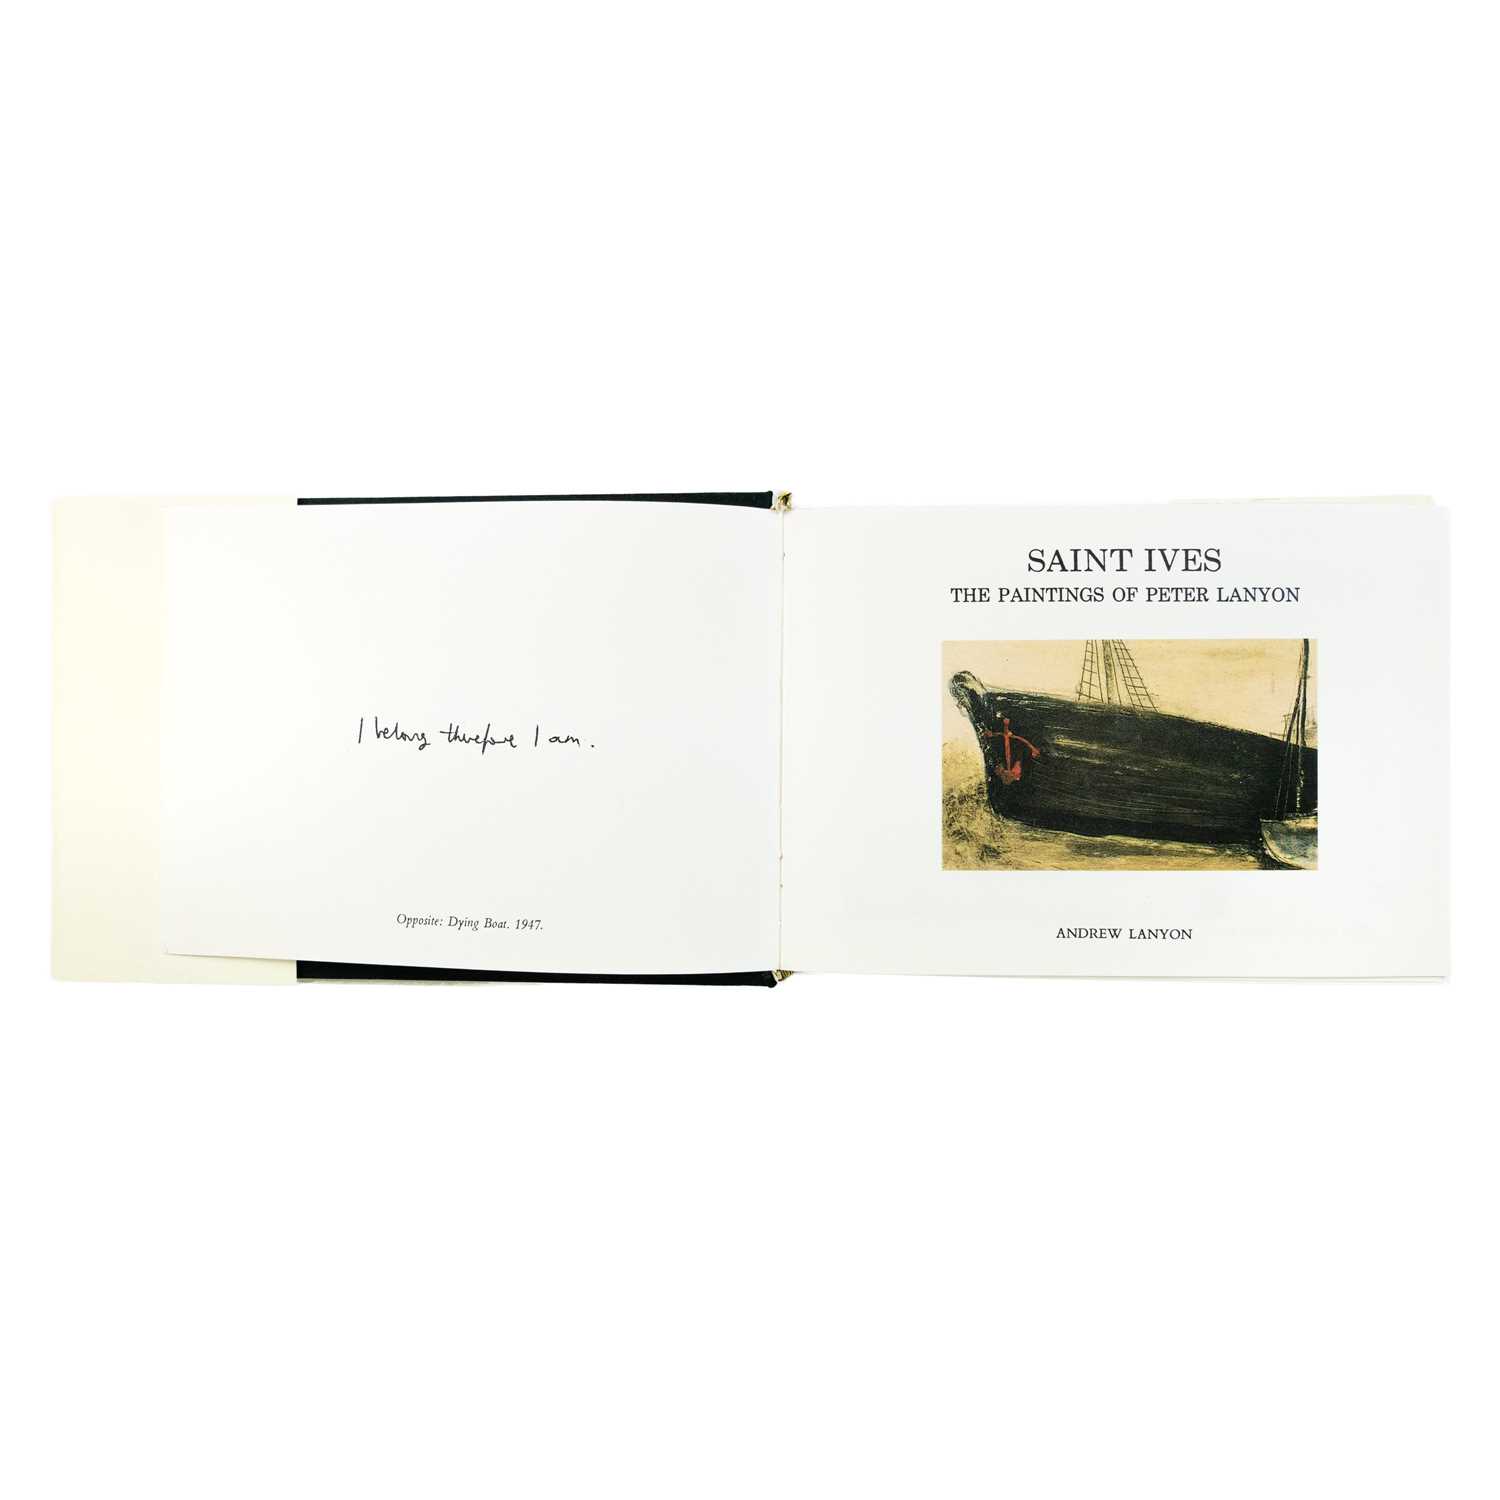 Andrew LANYON (1947) 'Saint Ives: The Paintings of Peter Lanyon', 2001, signed and numbered 57 - Image 4 of 6